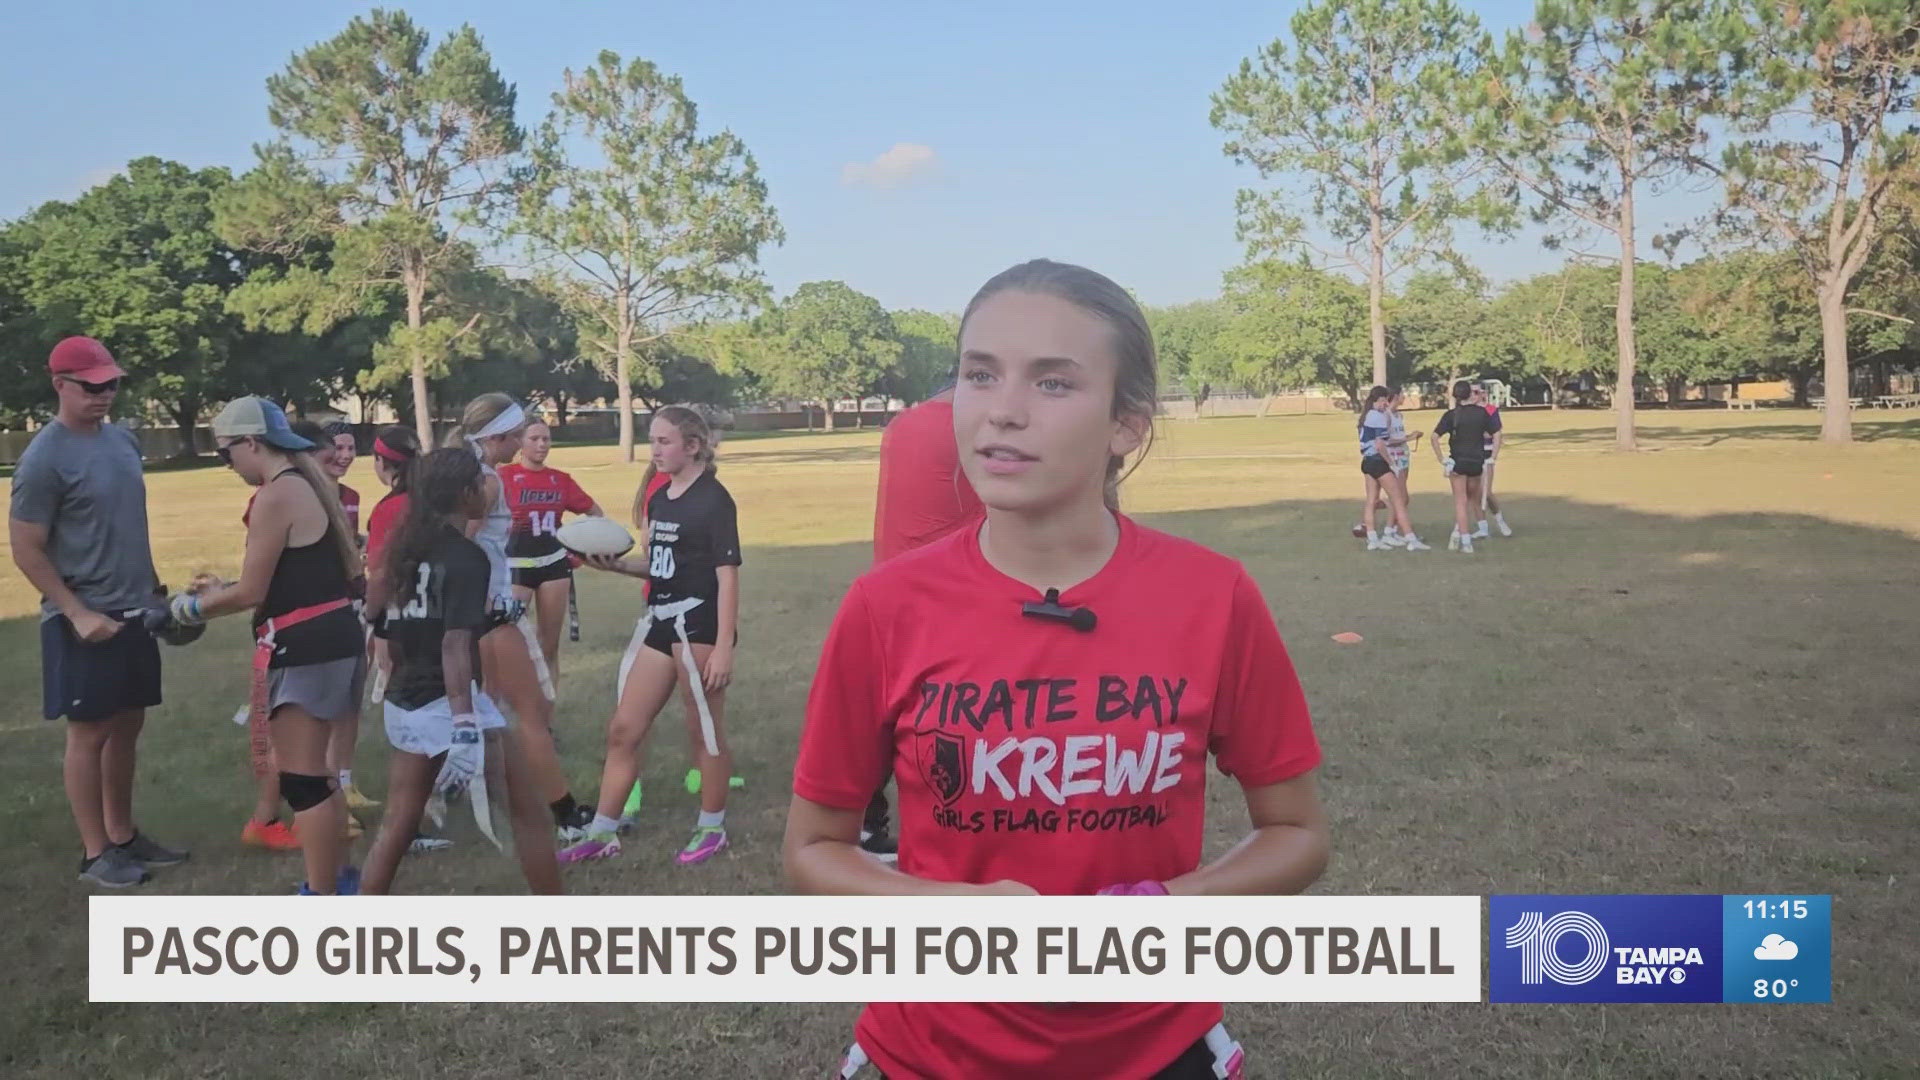 Hillsborough, Pinellas, Hernando, Polk and Manatee counties all offer flag football for girls, but Pasco does not.